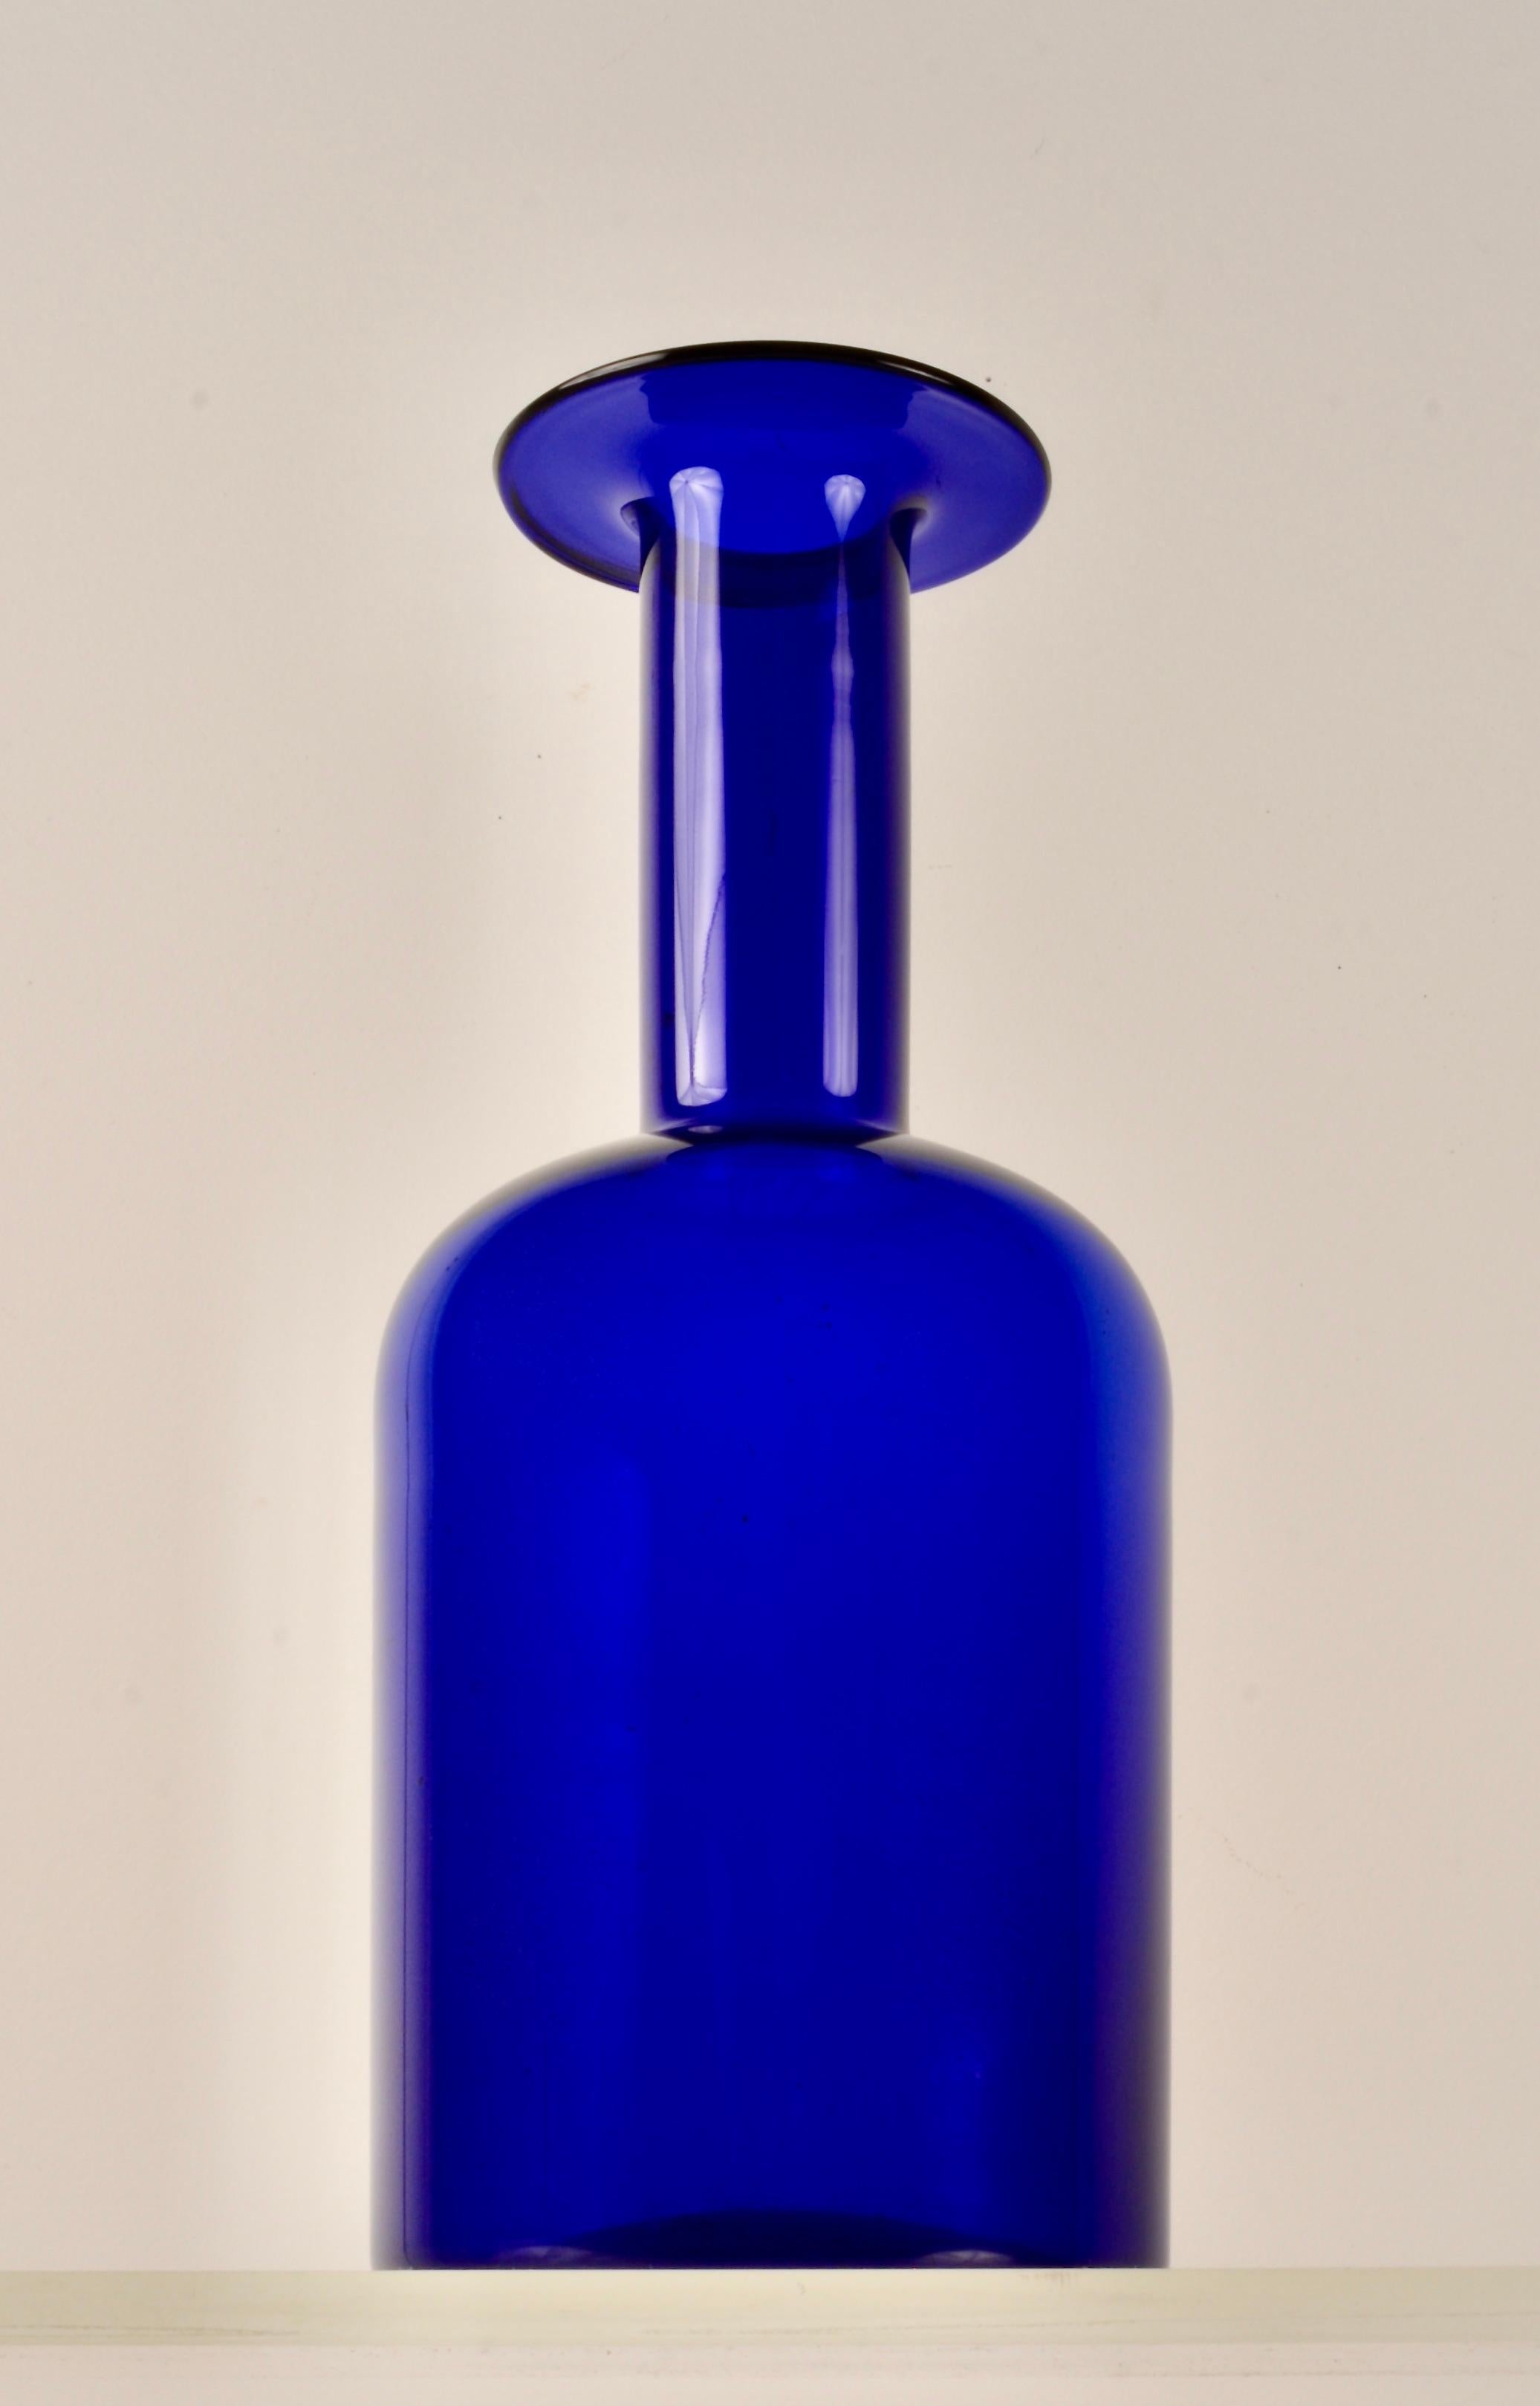 Iconic Holmegaard vase in deep cobolt blue. The nice large size. This example in very fine condition.